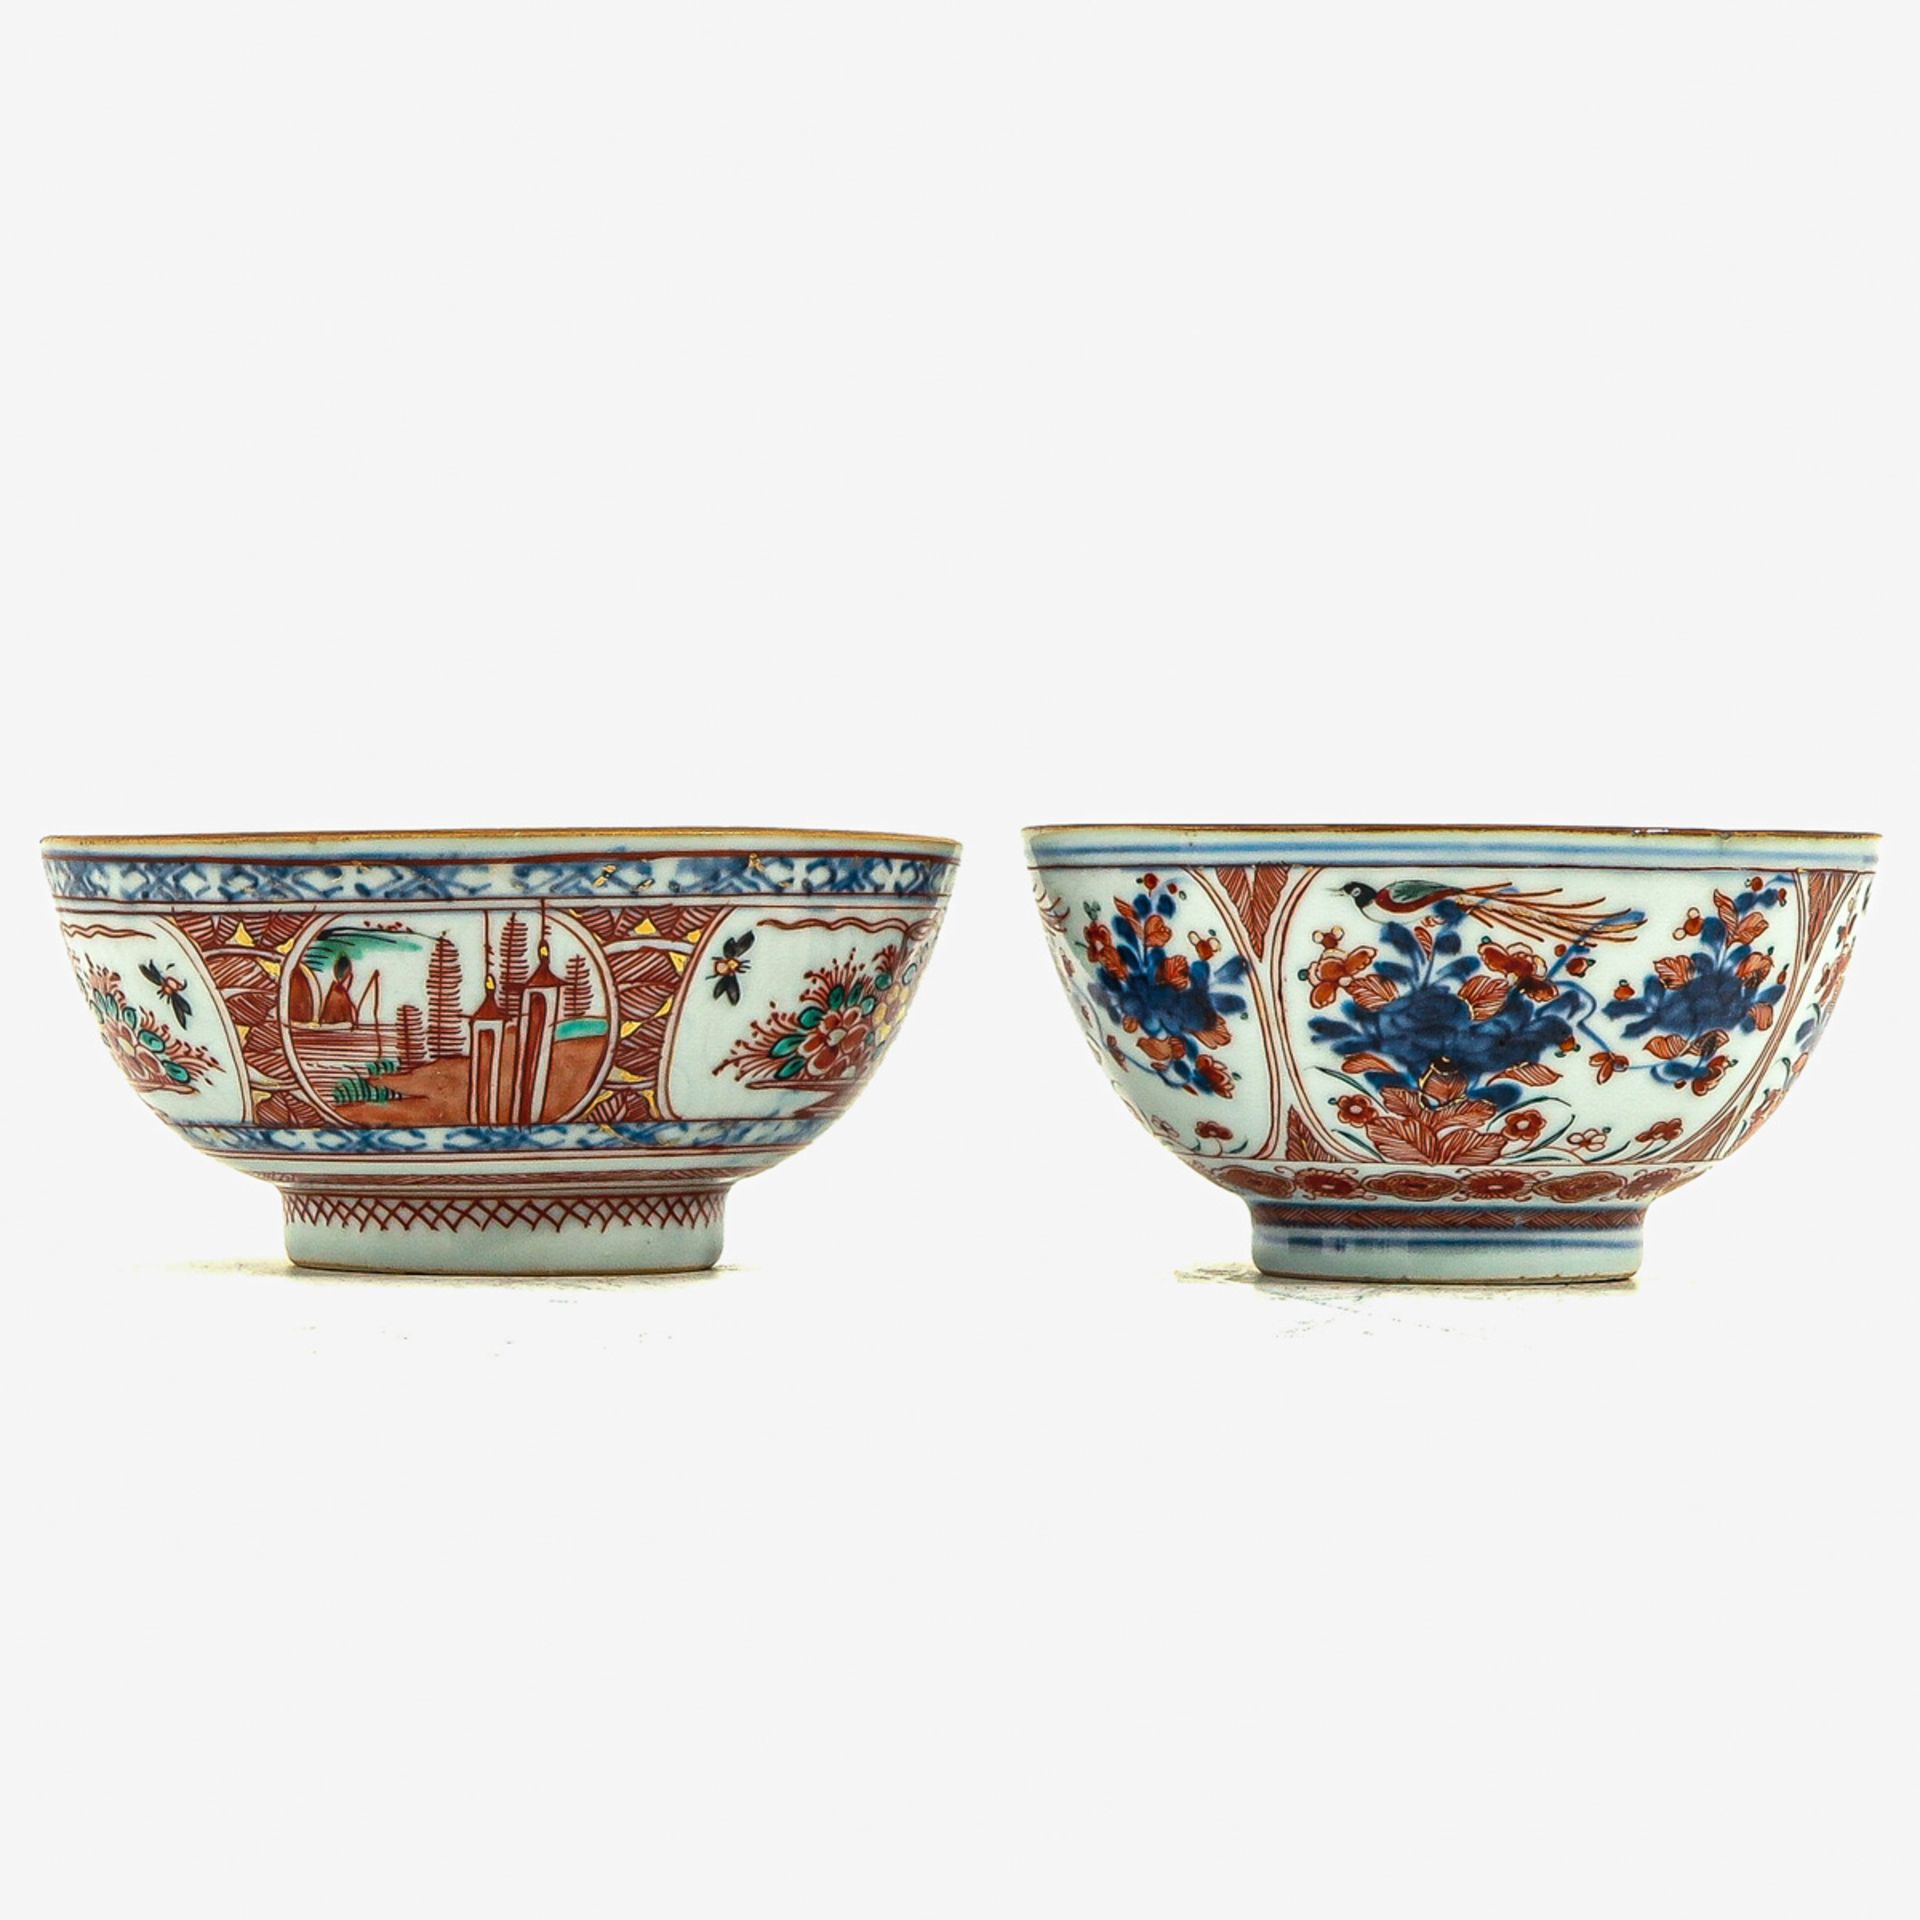 A Lot of 2 Polychrome Bowls - Image 2 of 6